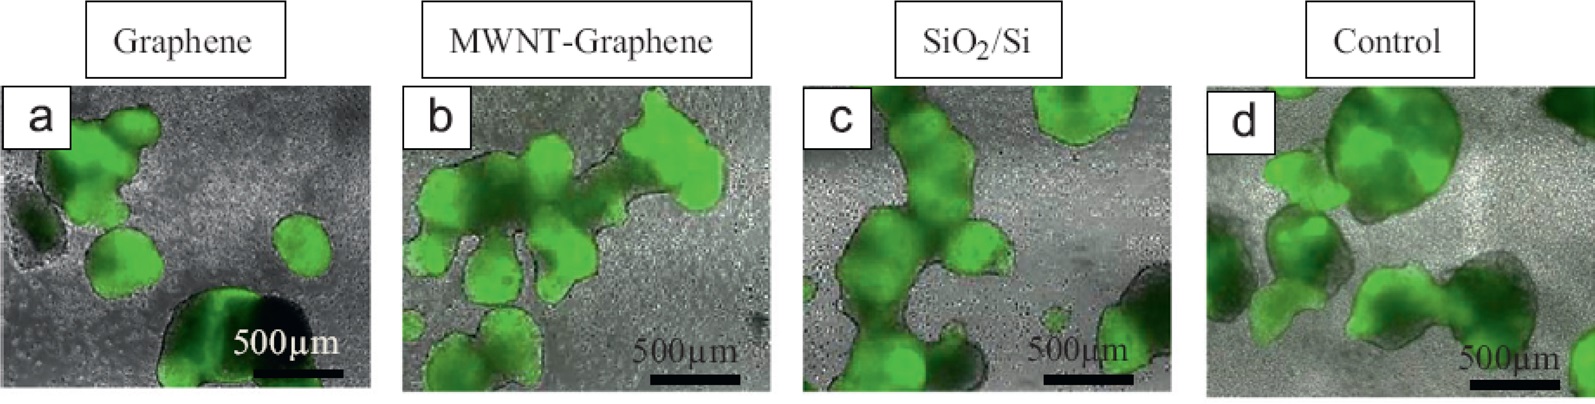 Fluorescence images of H9 human embryonic stem cells cultured on graphene, multi-walled carbon nanotube (MWCNT)-graphene hybrid, glass, control tissue culture polystyrene substrates for 9 days [33].